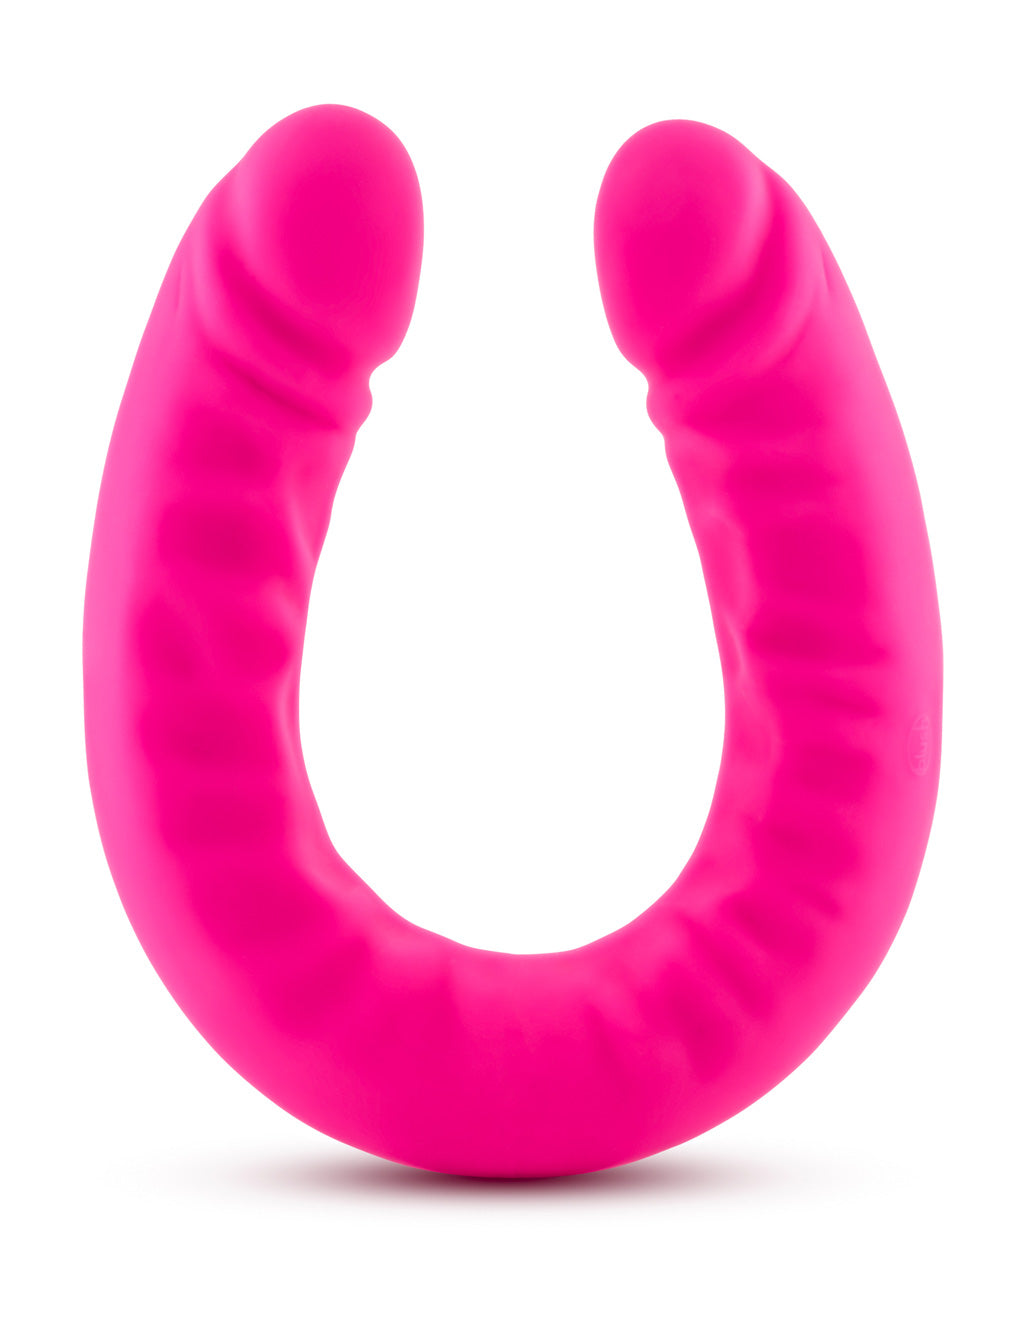 Ruse 18-inch Silicone Double Dong By Blush Novelties Front